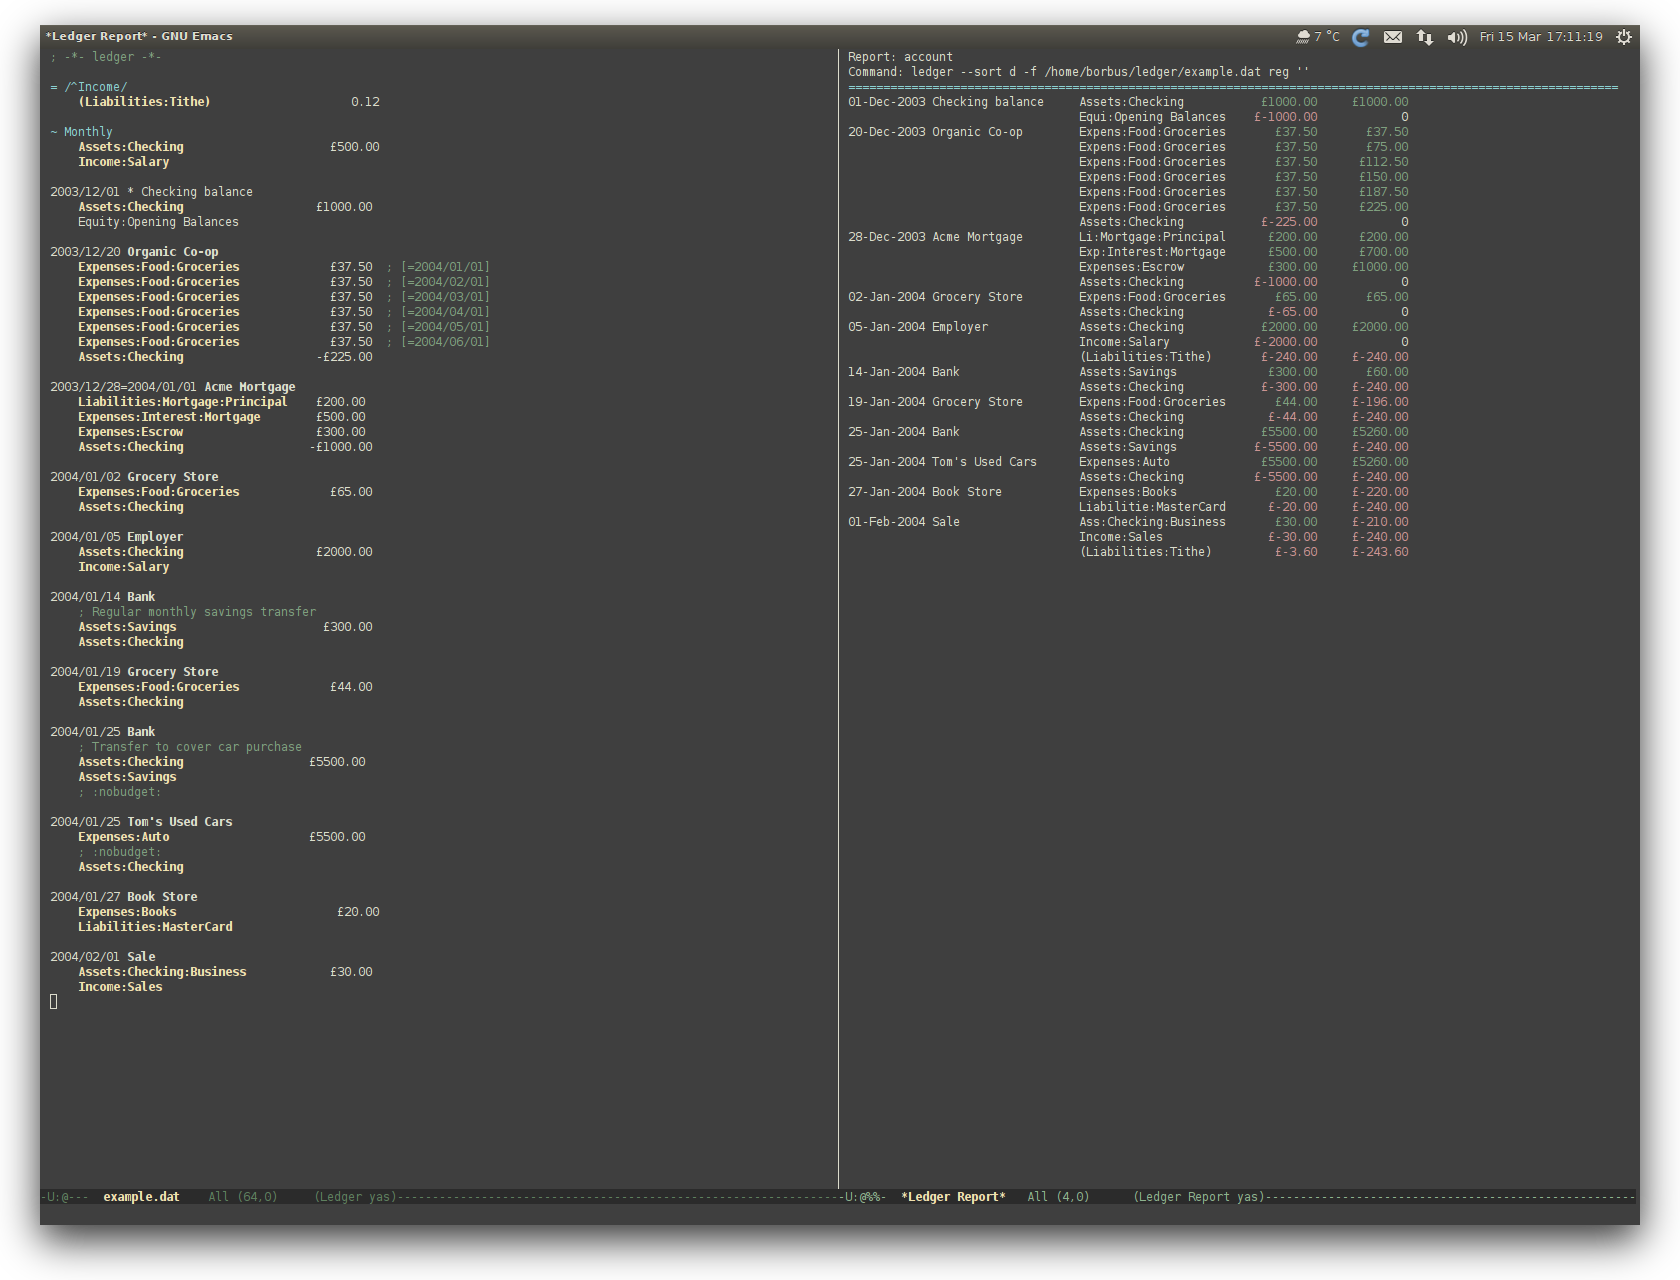 /TakeV/spacemacs/media/commit/04fbe5da24ce9ad71c9d5274f0759aca1786d939/layers/finance/img/ledger.png